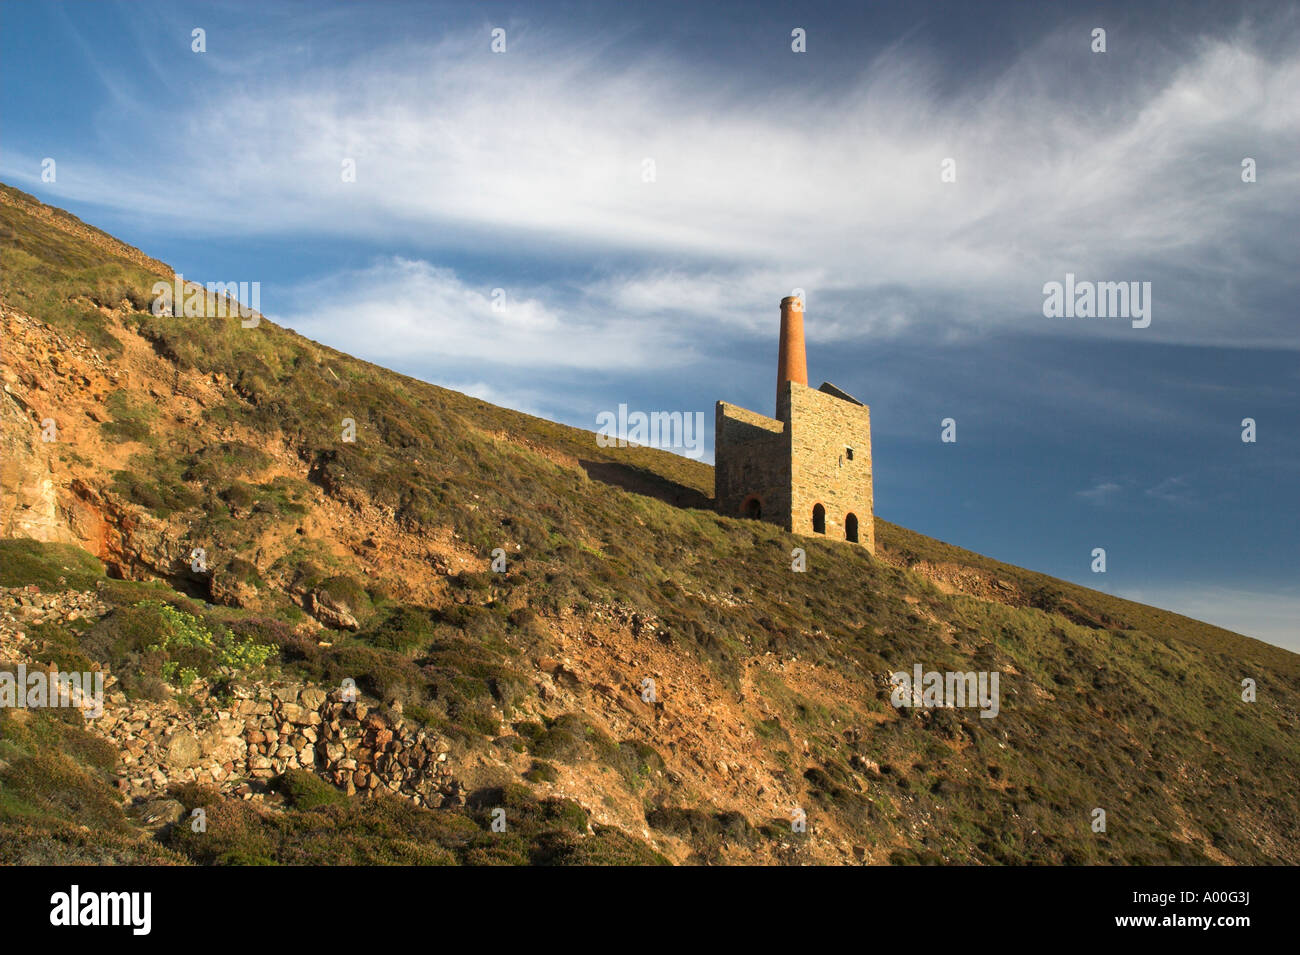 Looking up at Towanroath Engine House from the cliff below at Wheal Coates near St Agnes Cornwall England UK. Stock Photo